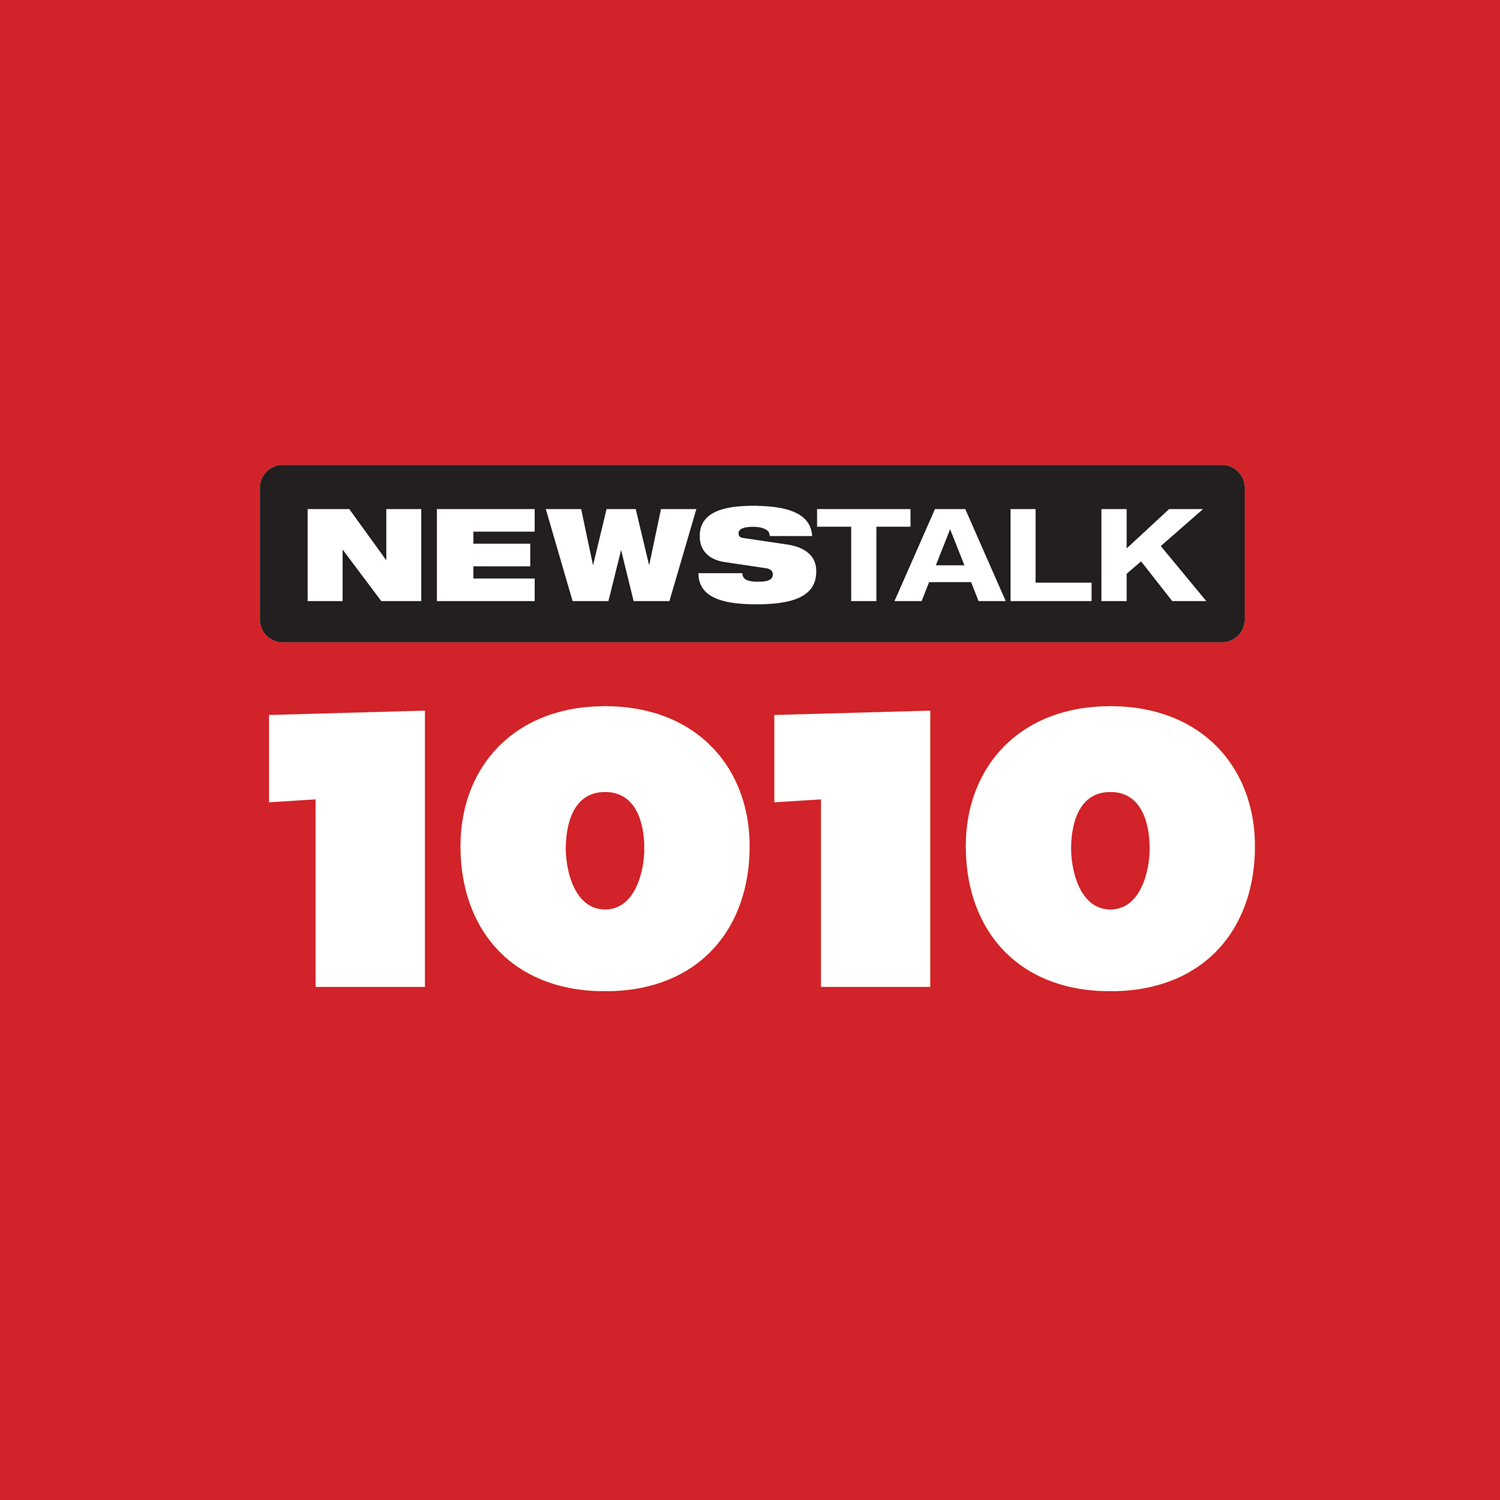 NDP MPP @Peter_Tabuns talks extreme heat and heat stress and why we need to address it with @JohnTory on @MooreintheAM. Plus legislation he is working on around it and what kind of action we need to see.